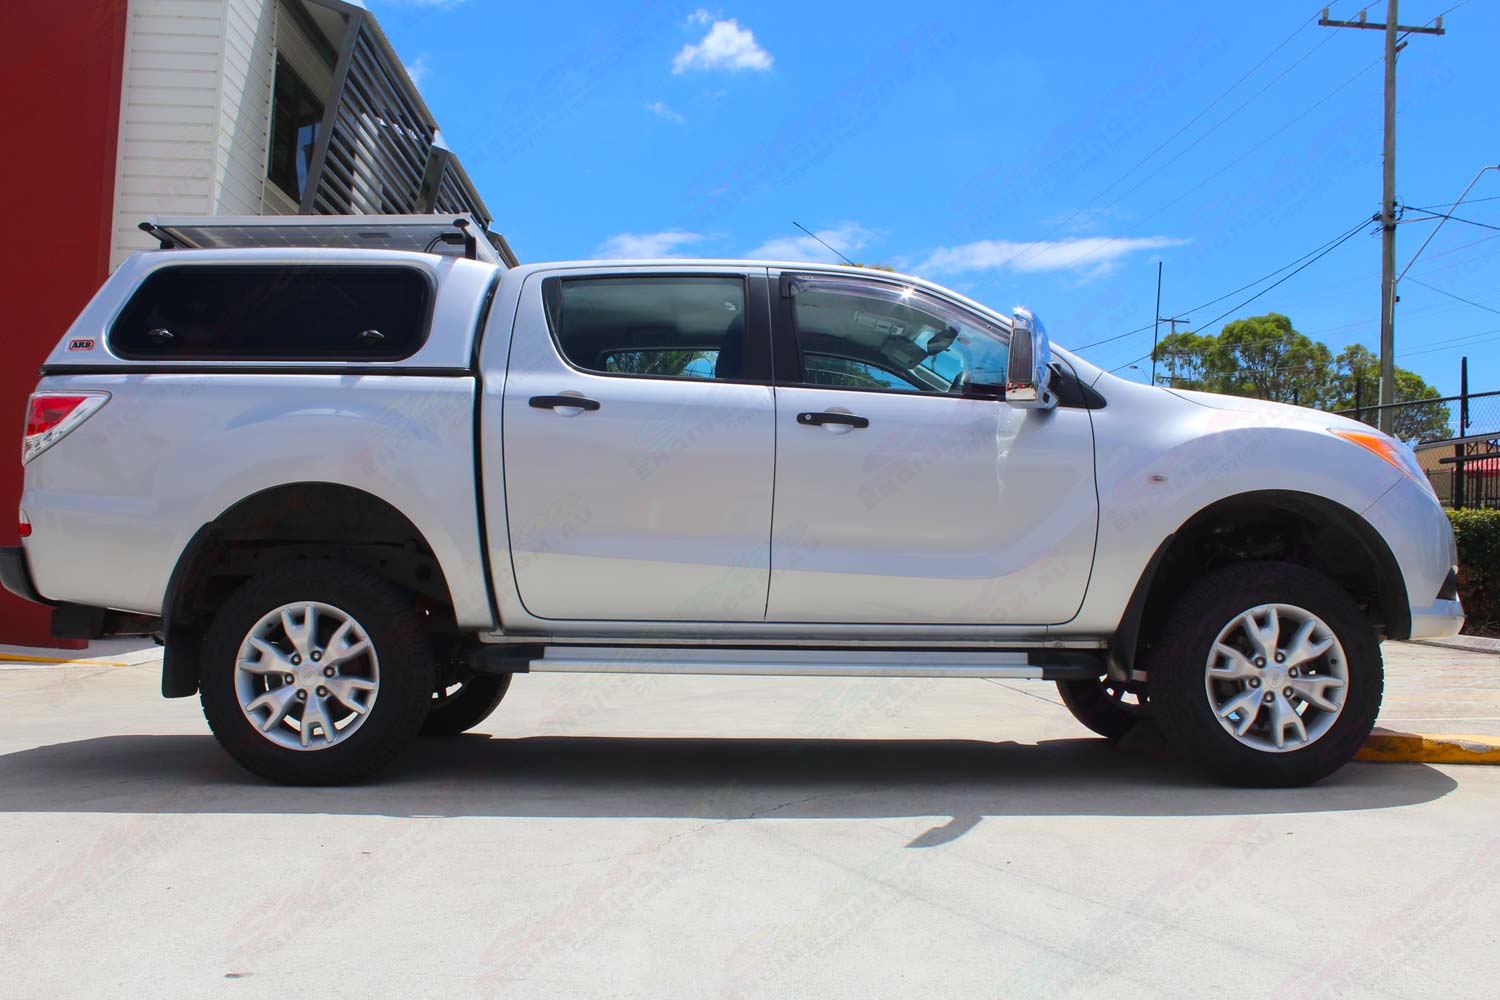 Right side view of a silver dual cab Mazda BT-50 after being fitted with a 2 inch lift kit at the Superior Engineering Deception Bay workshop